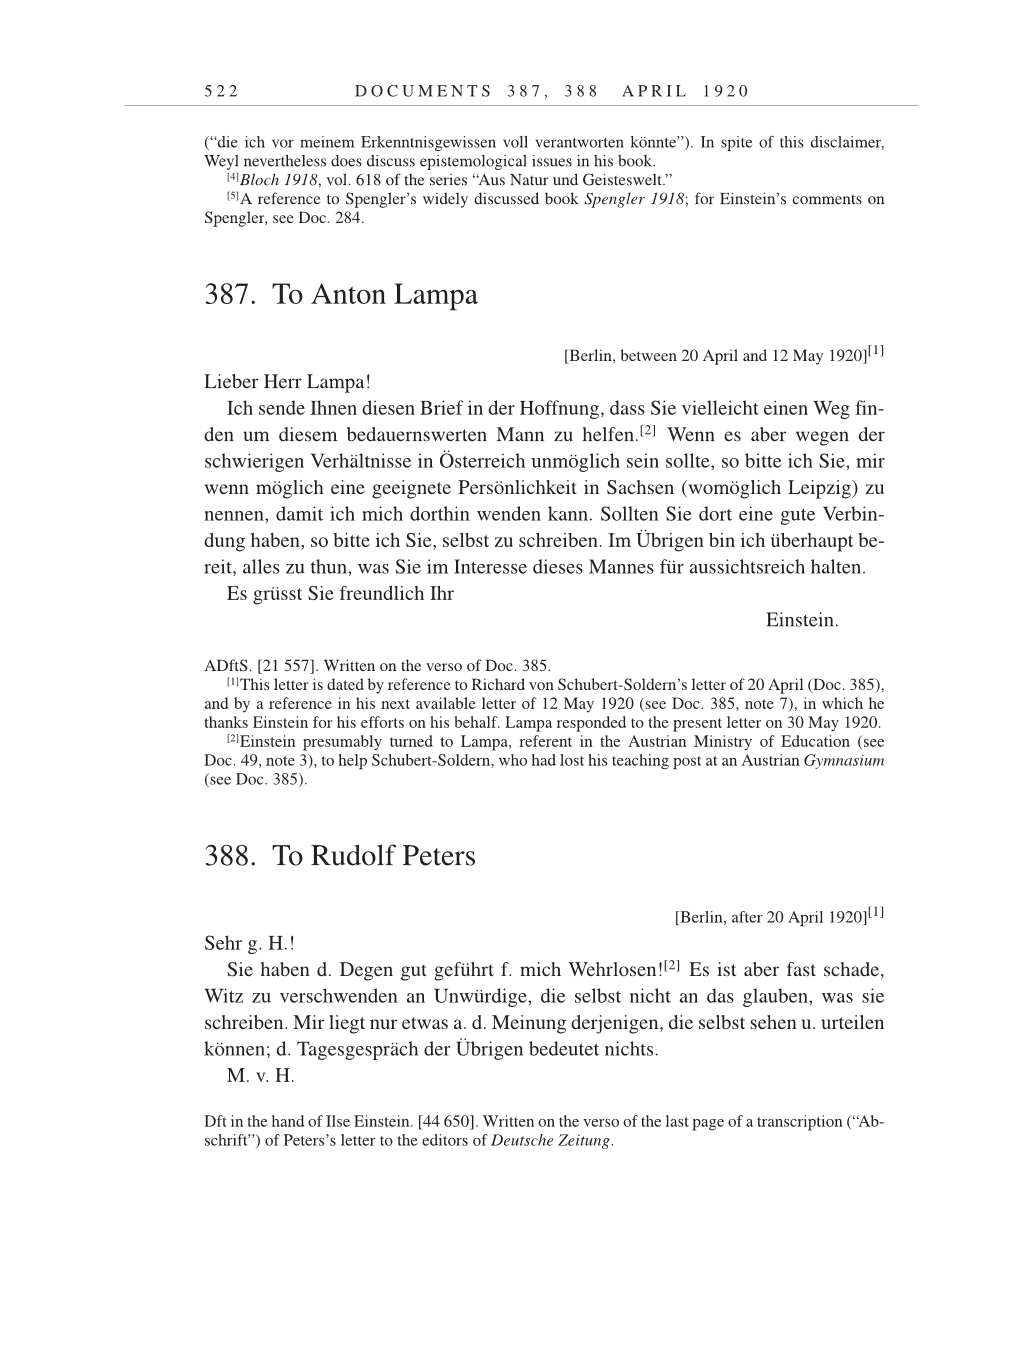 Volume 9: The Berlin Years: Correspondence January 1919-April 1920 page 522